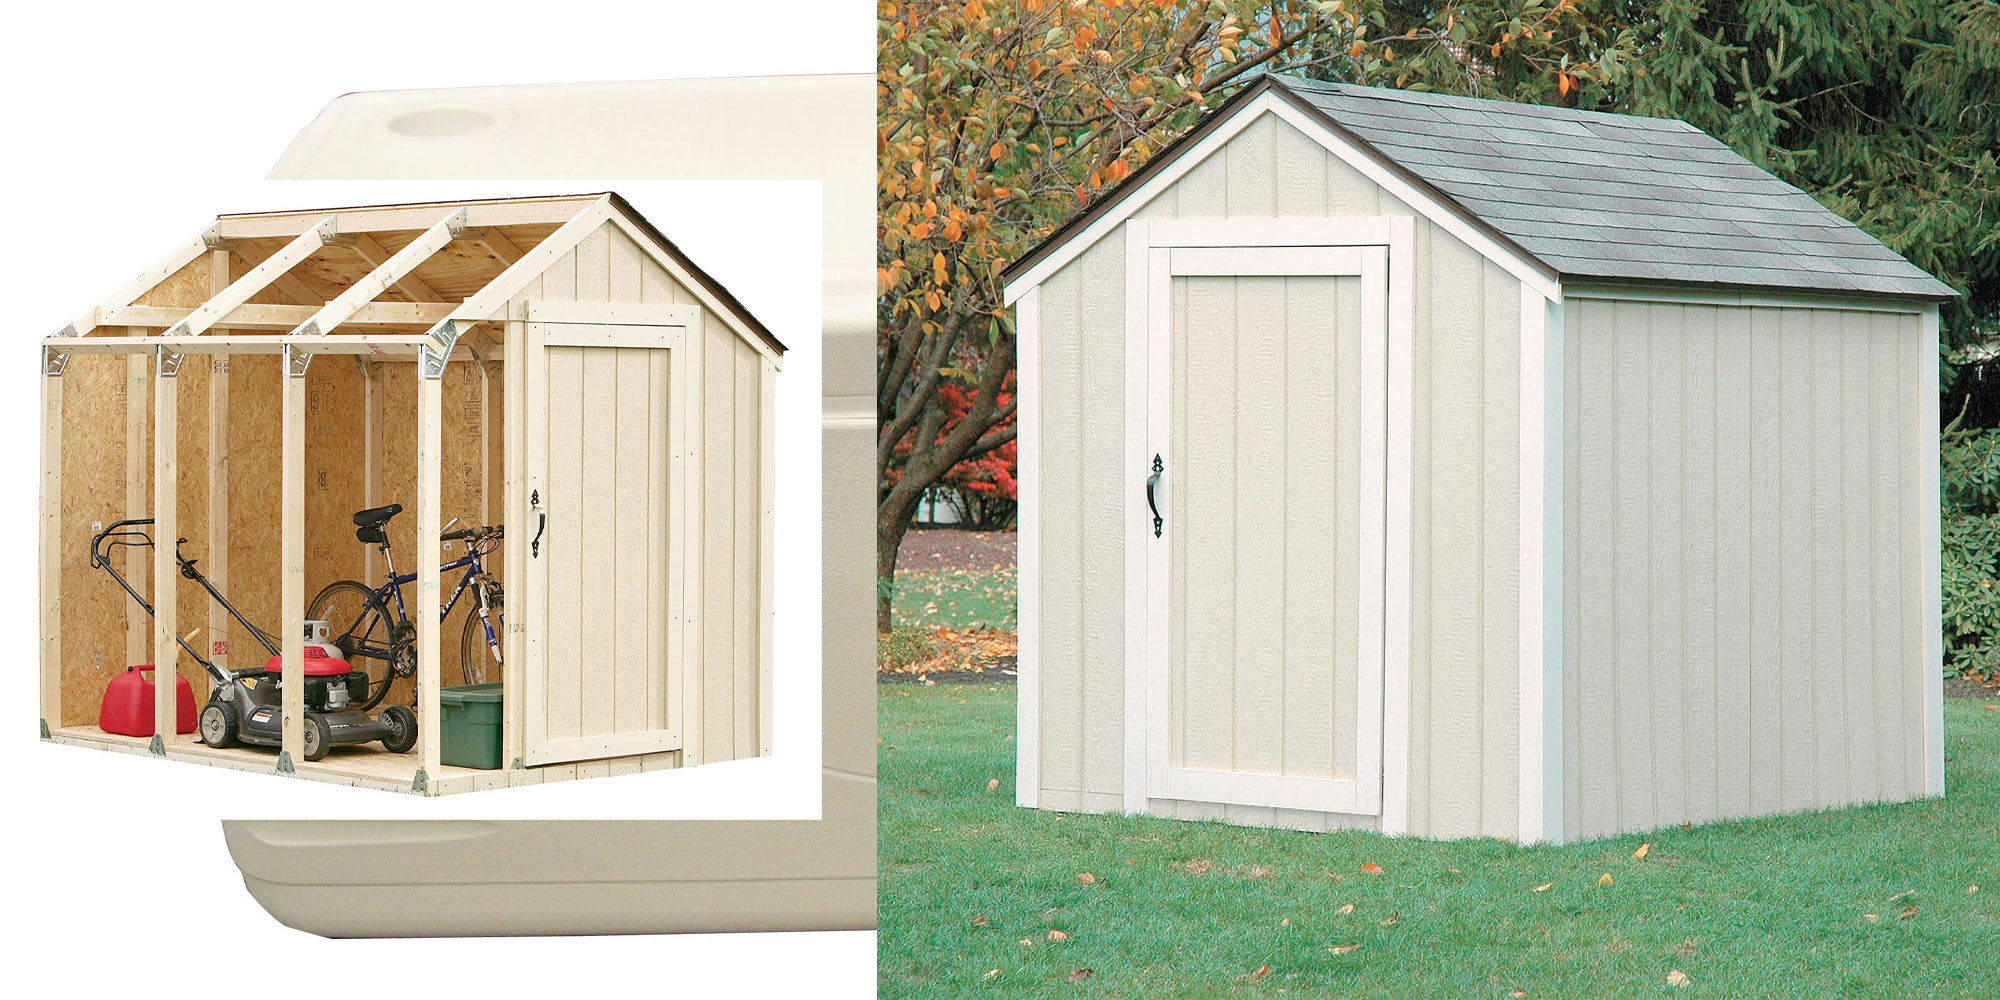 Build your own shed w/ this 2x4 Basics kit for just $48 shipped on